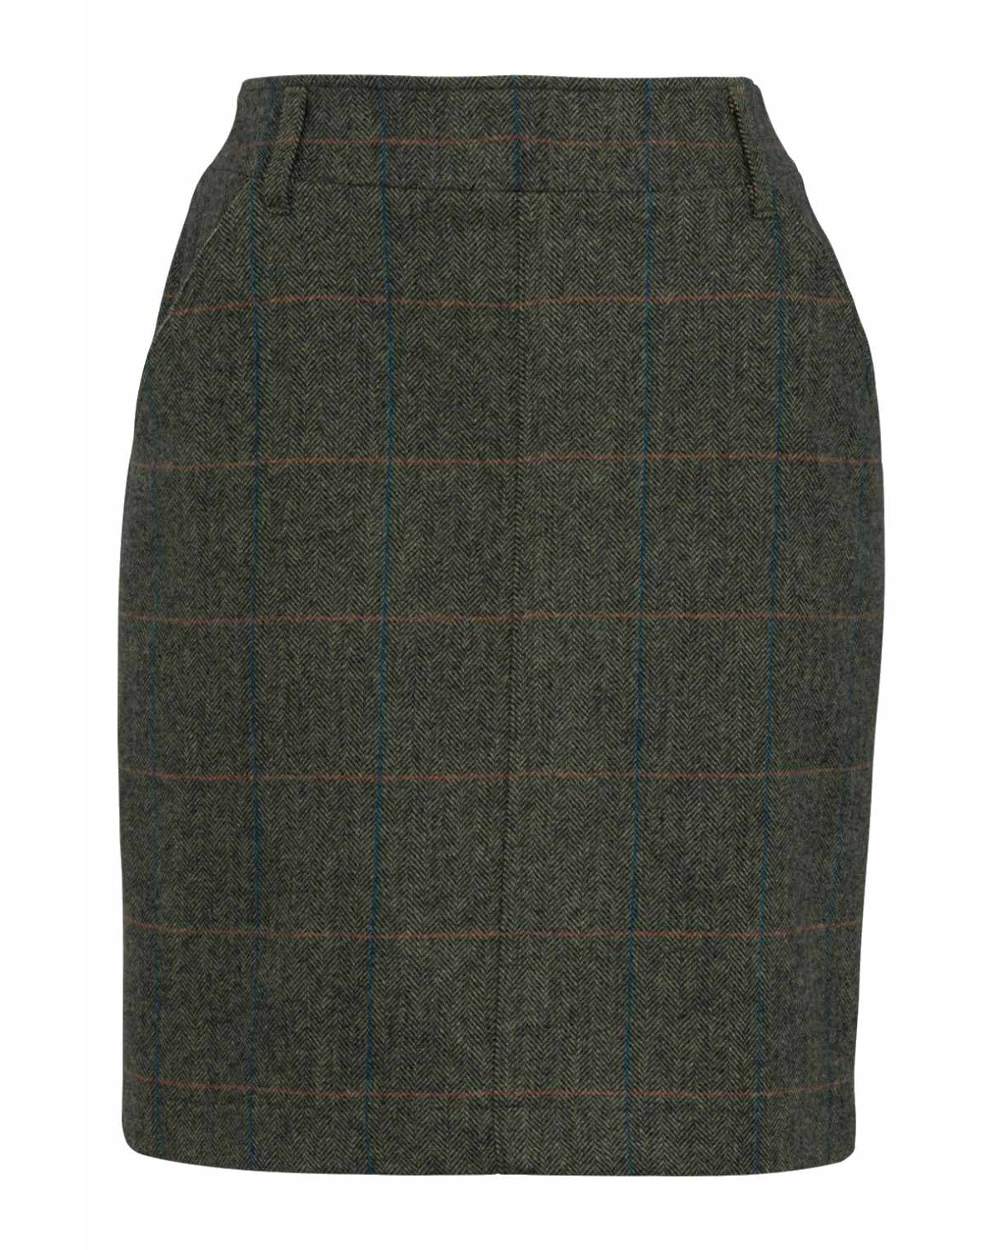 Alan Paine Combrook Tweed Skirt in Spruce 